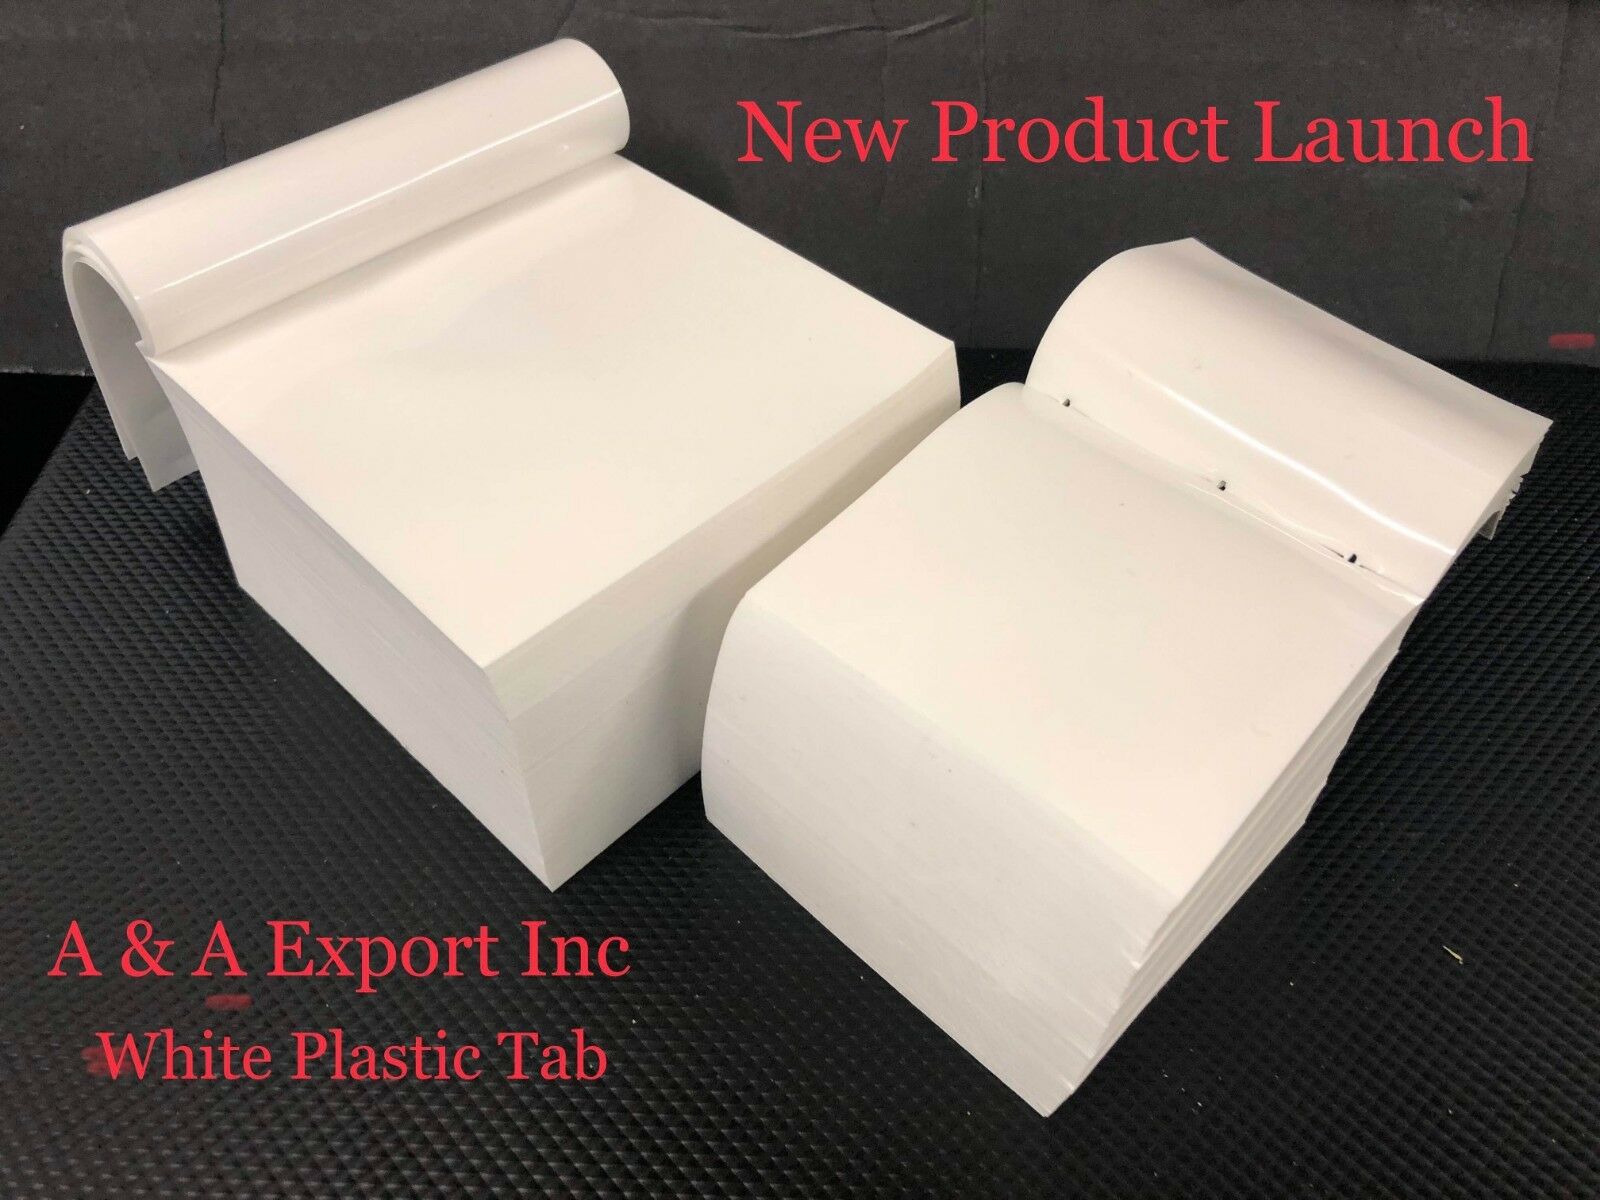 Free Shipping - On Sale Now- 4x4 White Plastic Tabs 1,000 cts - A&A Export Inc